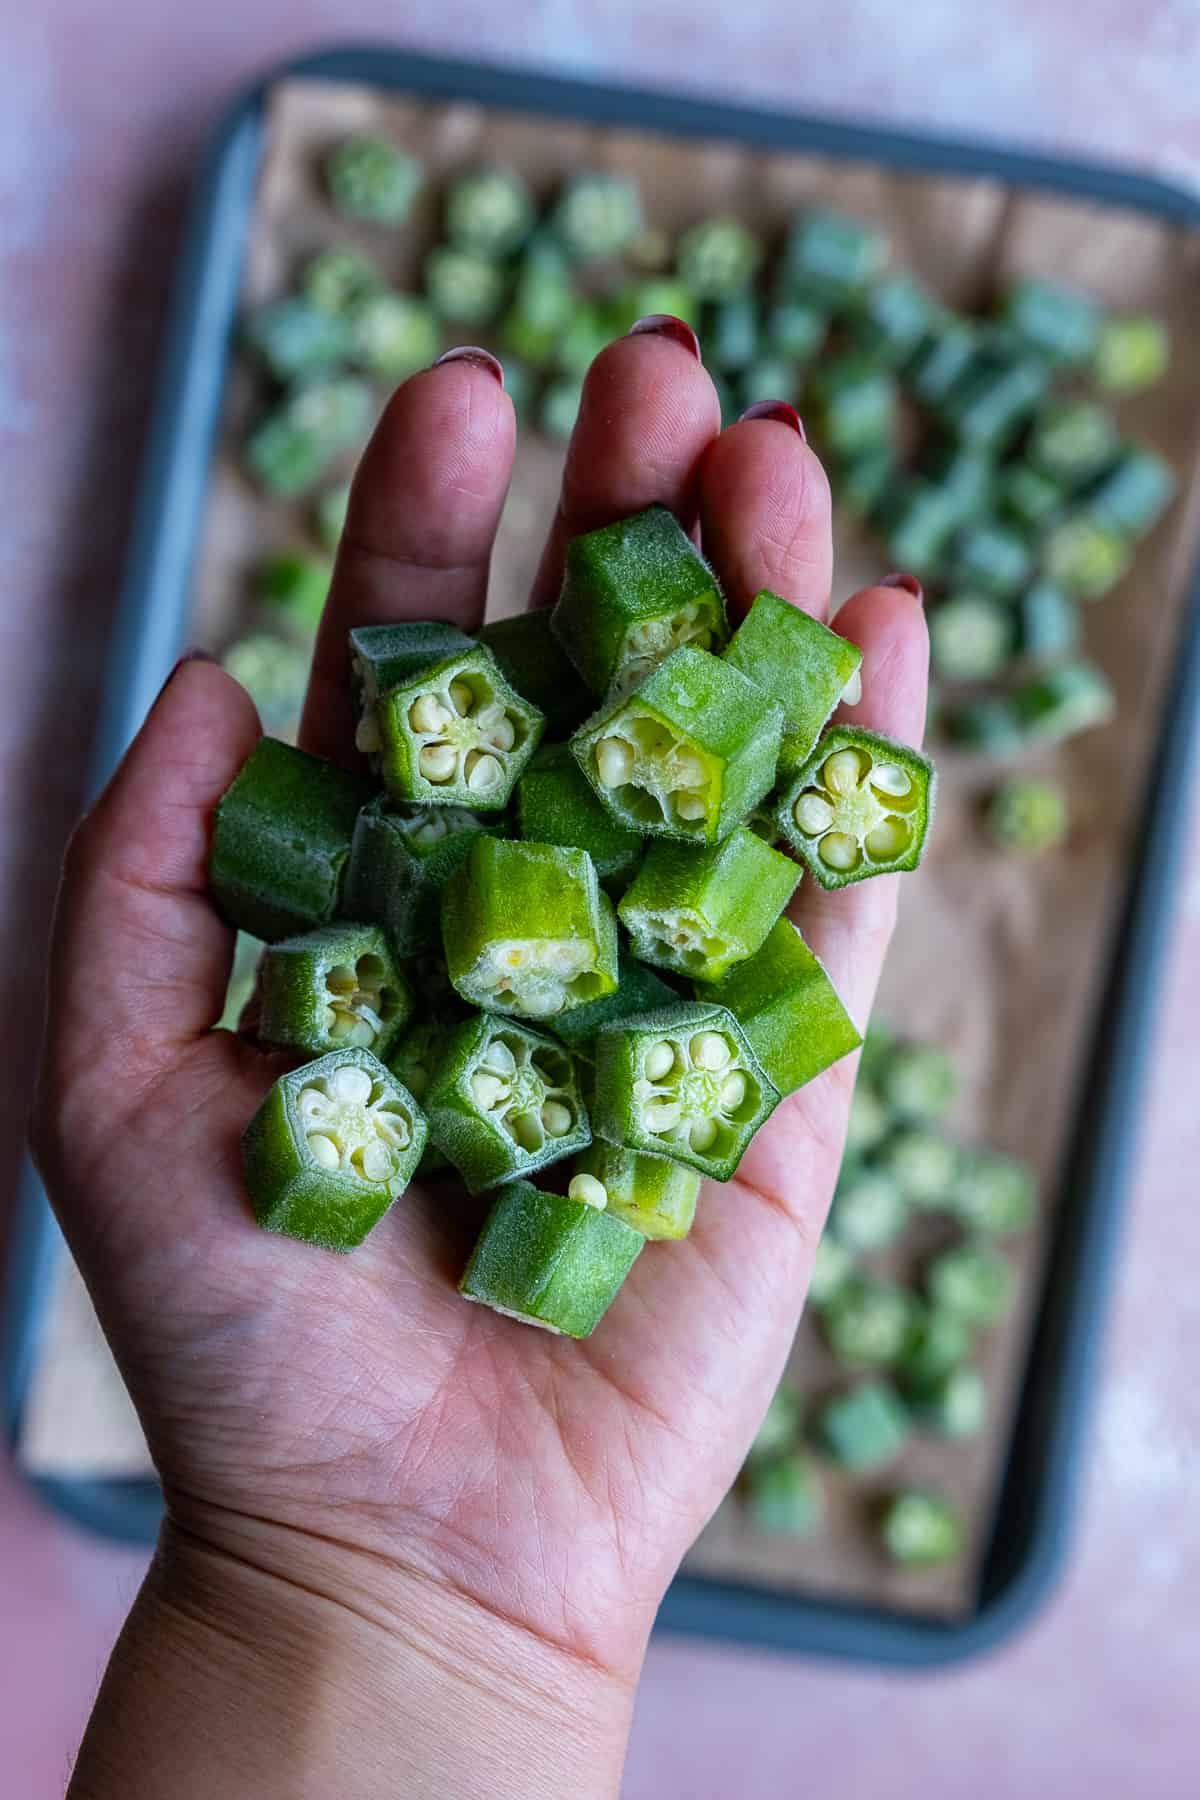 A hand holding round okra slices.